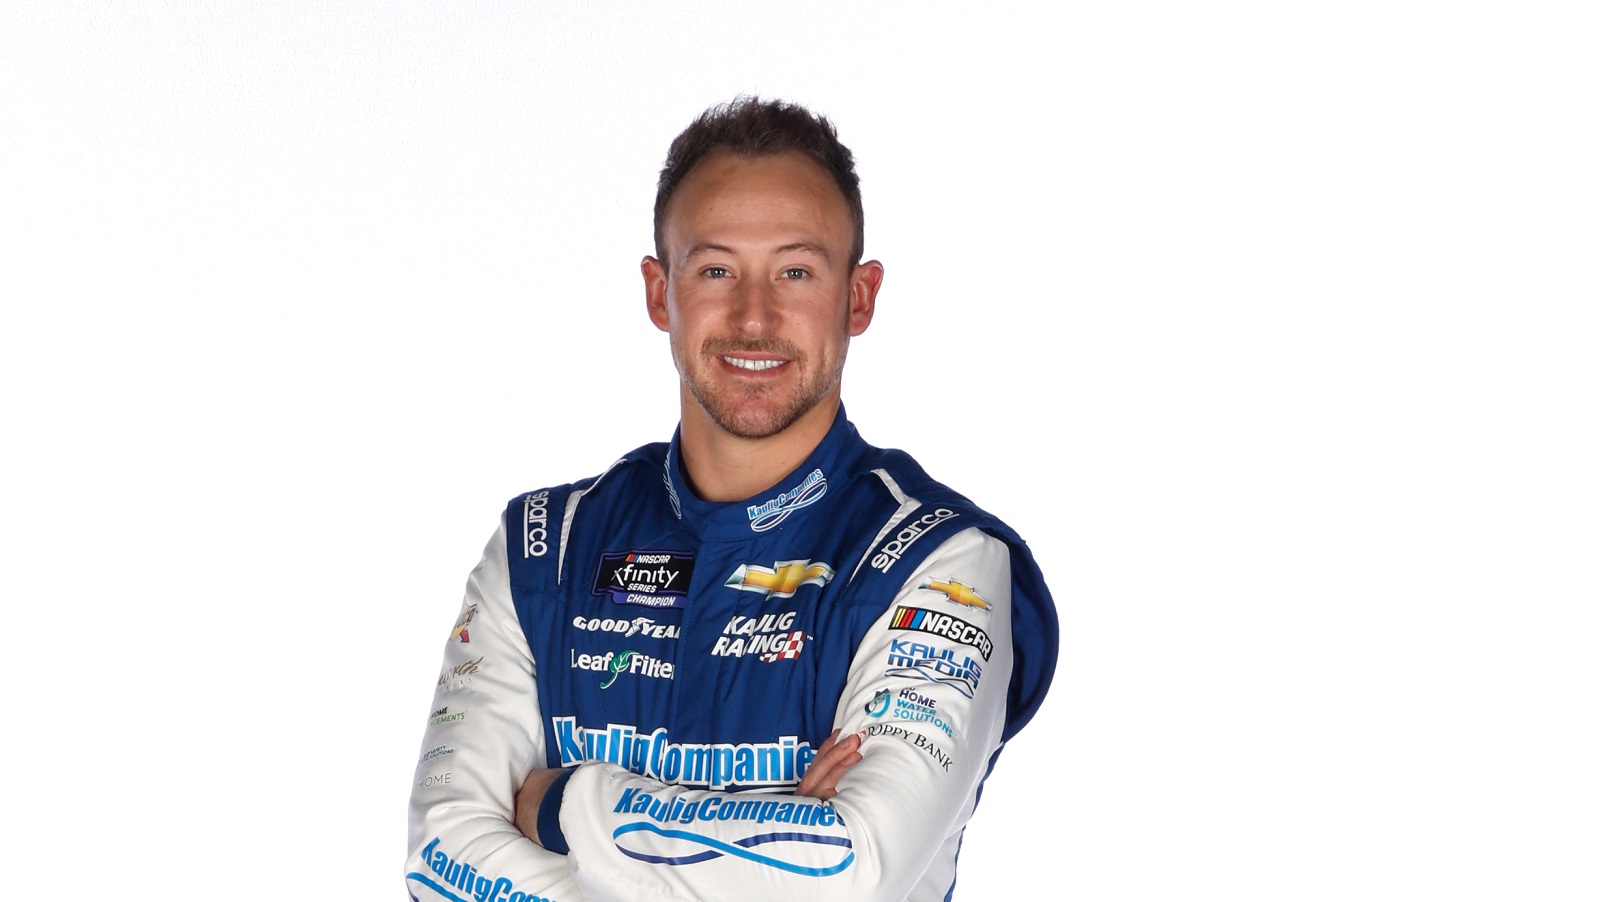 NASCAR driver Daniel Hemric poses for a photo during NASCAR Production Days at Clutch Studios on Jan. 18, 2022, in Concord, North Carolina.